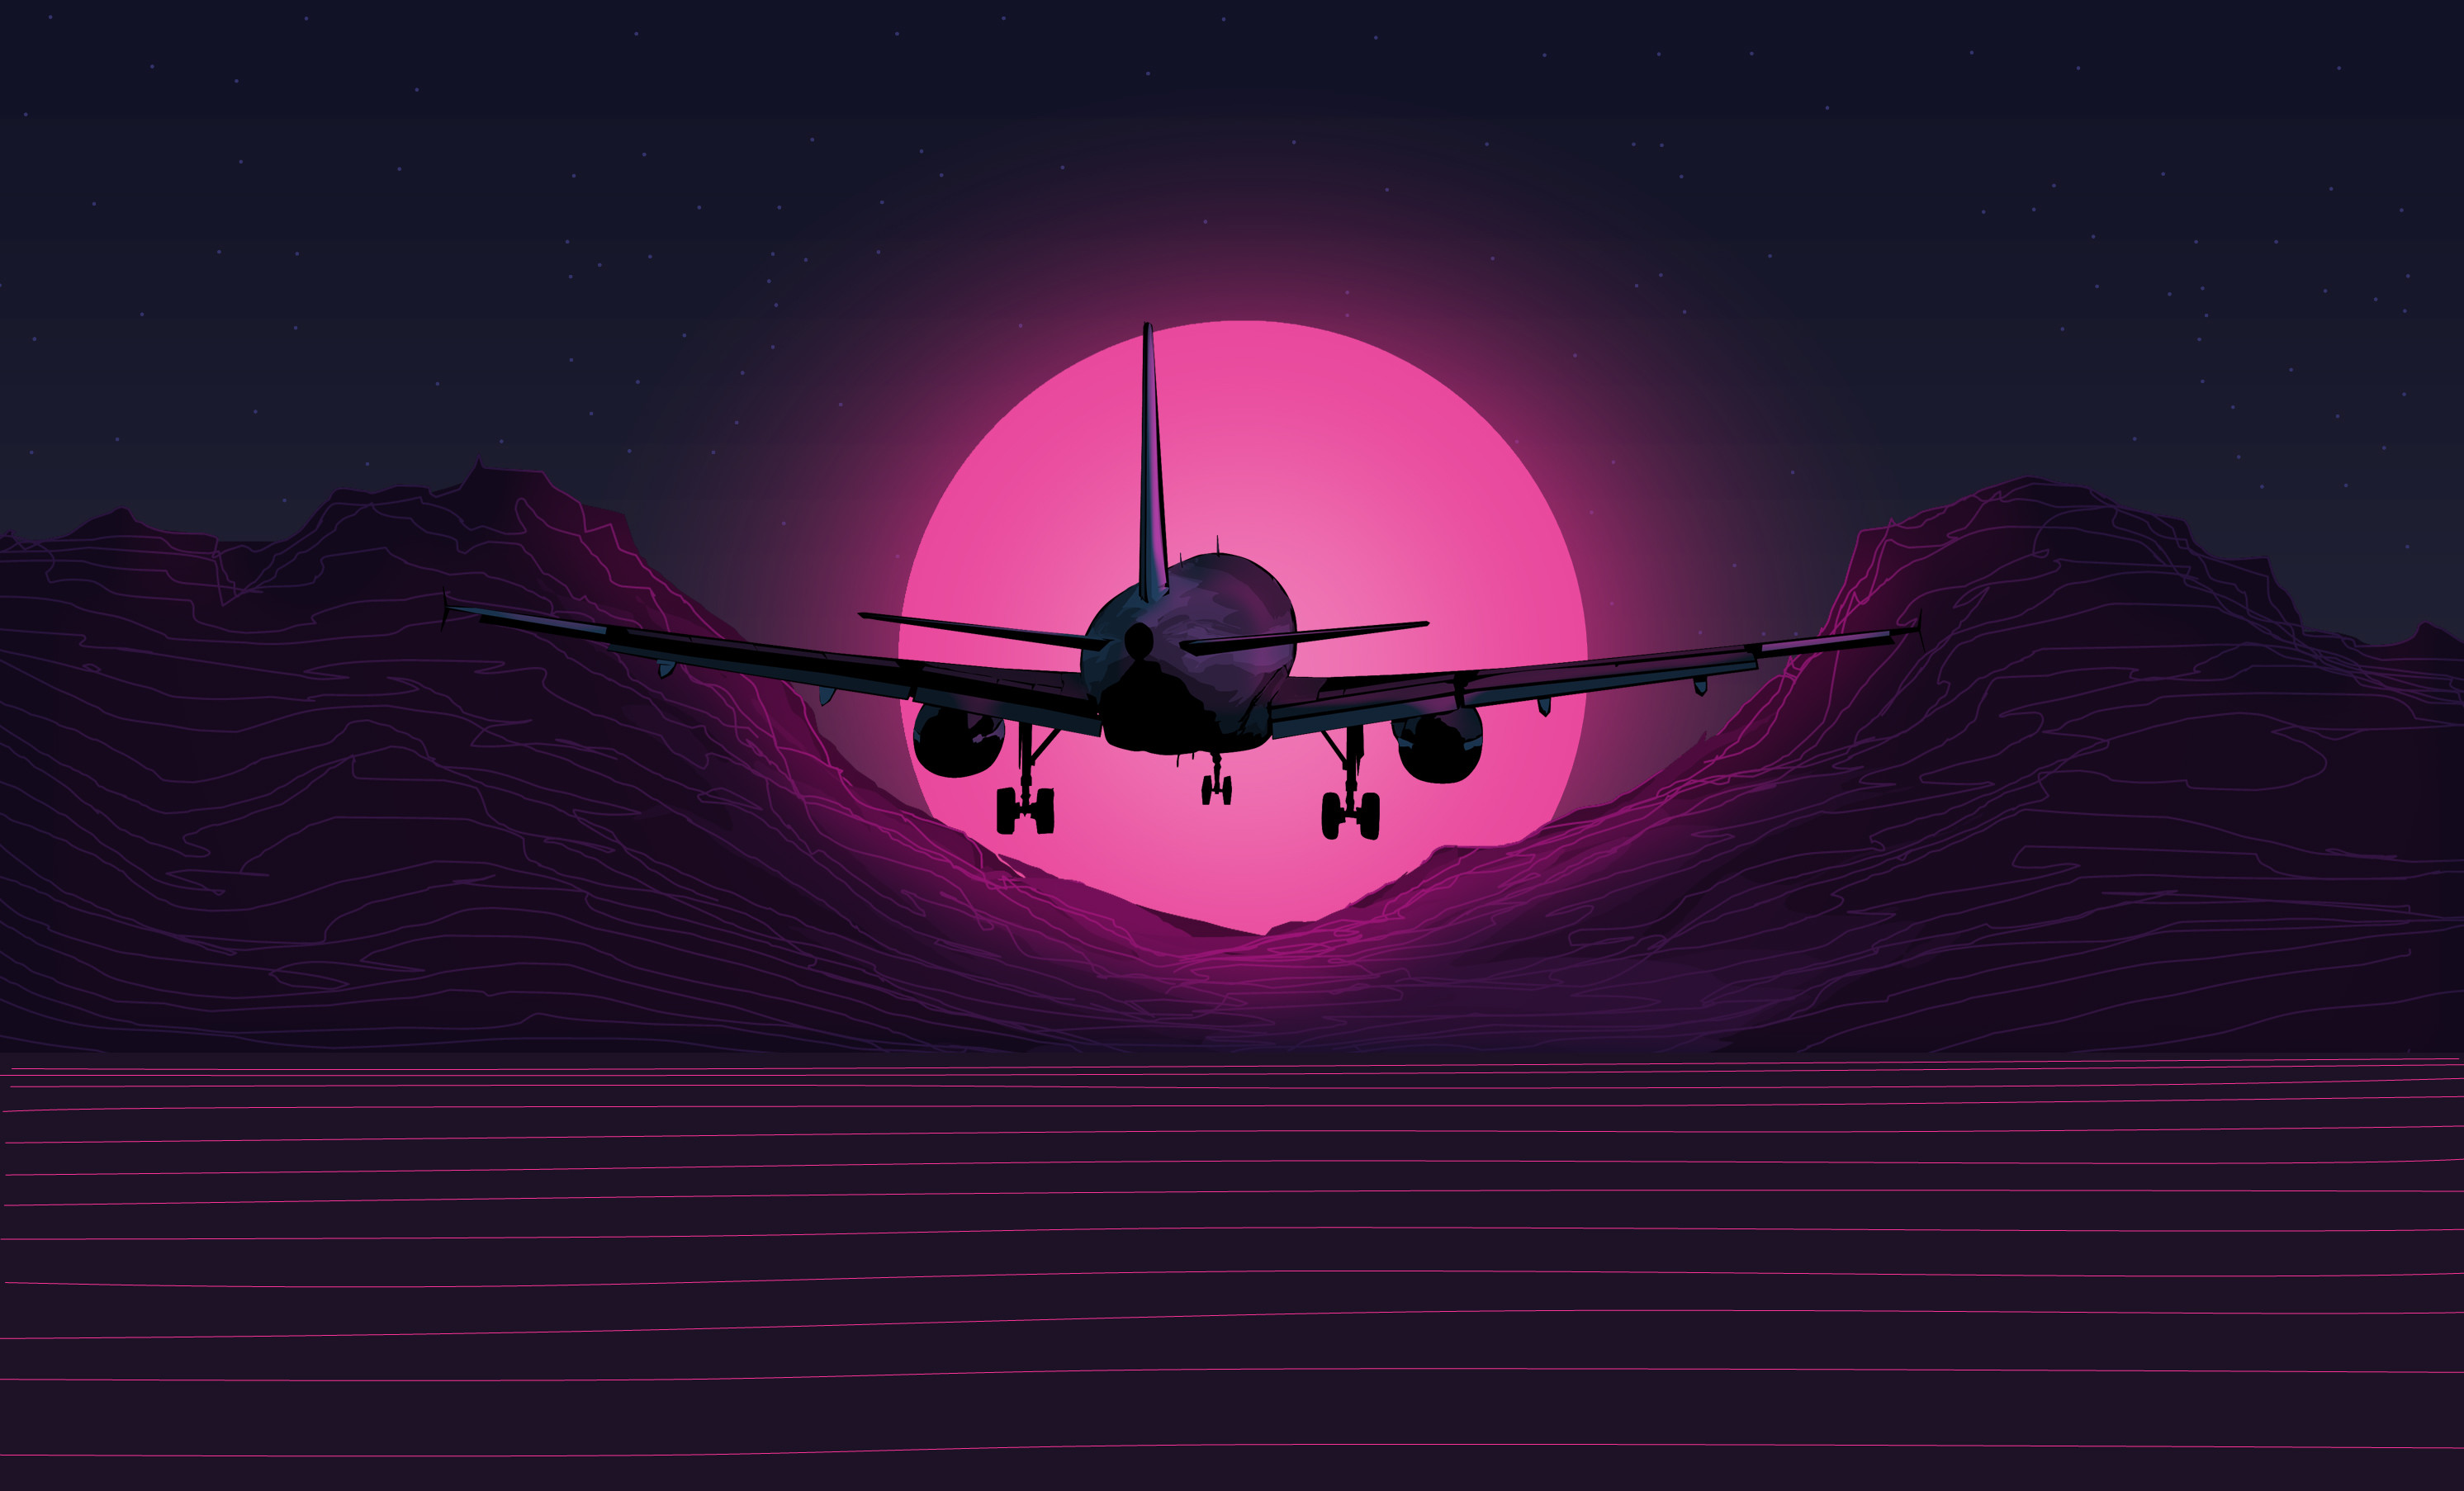 2984x1806 Synthwave Plane by devitant Synthwave Plane by devitant